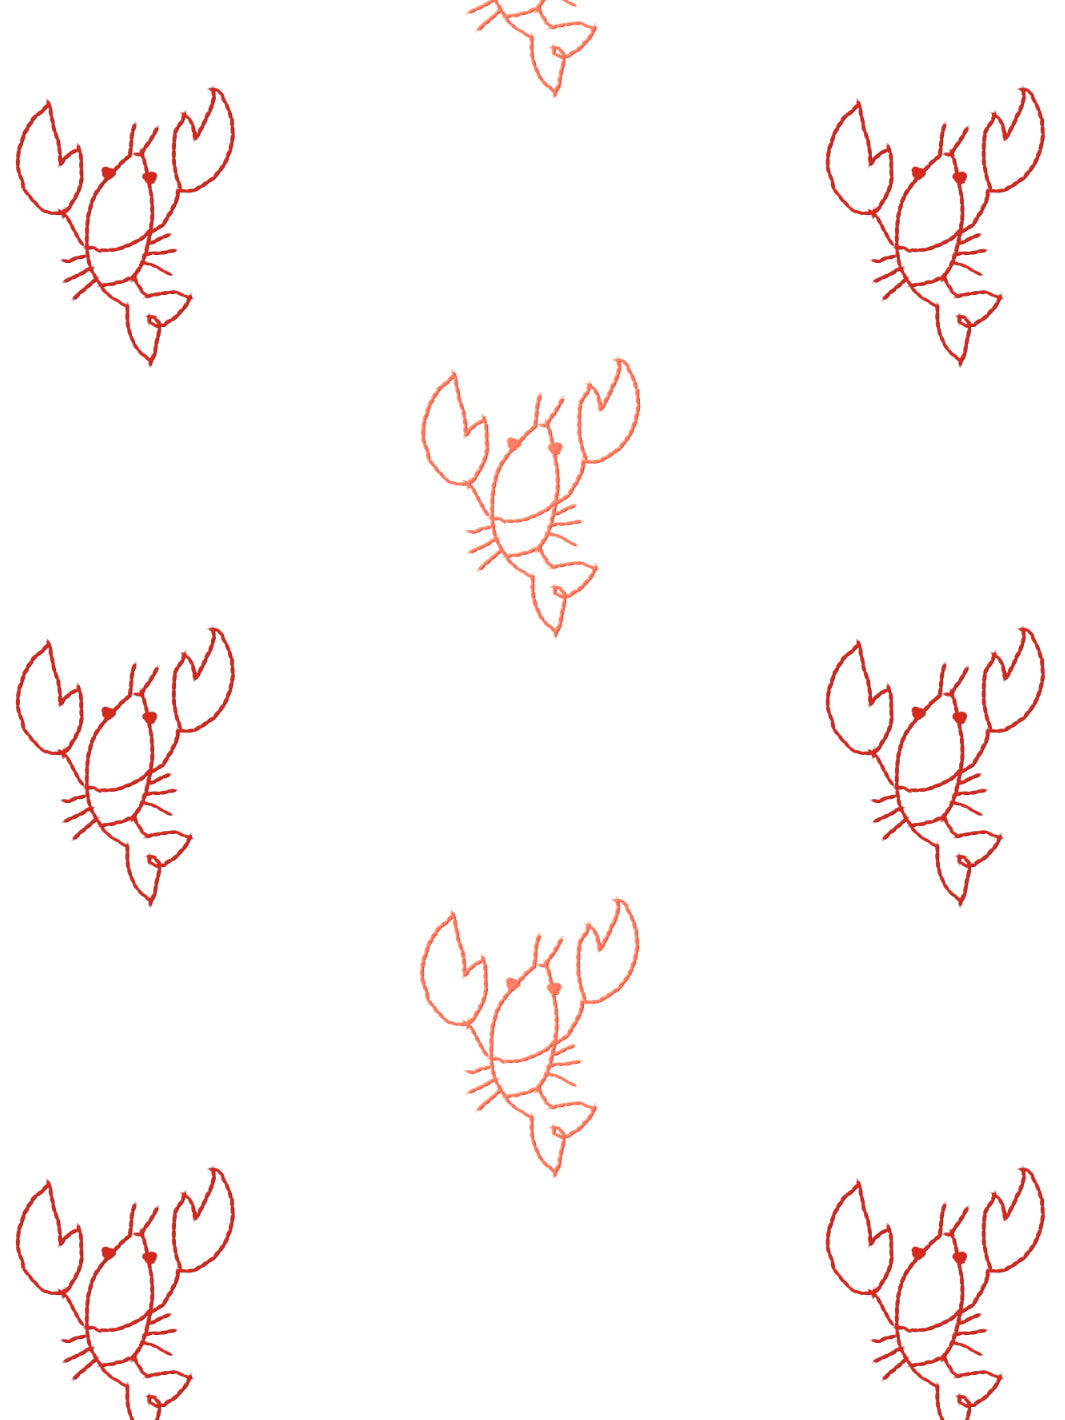 'Lobsters' Wallpaper by Lingua Franca - Coral + Red